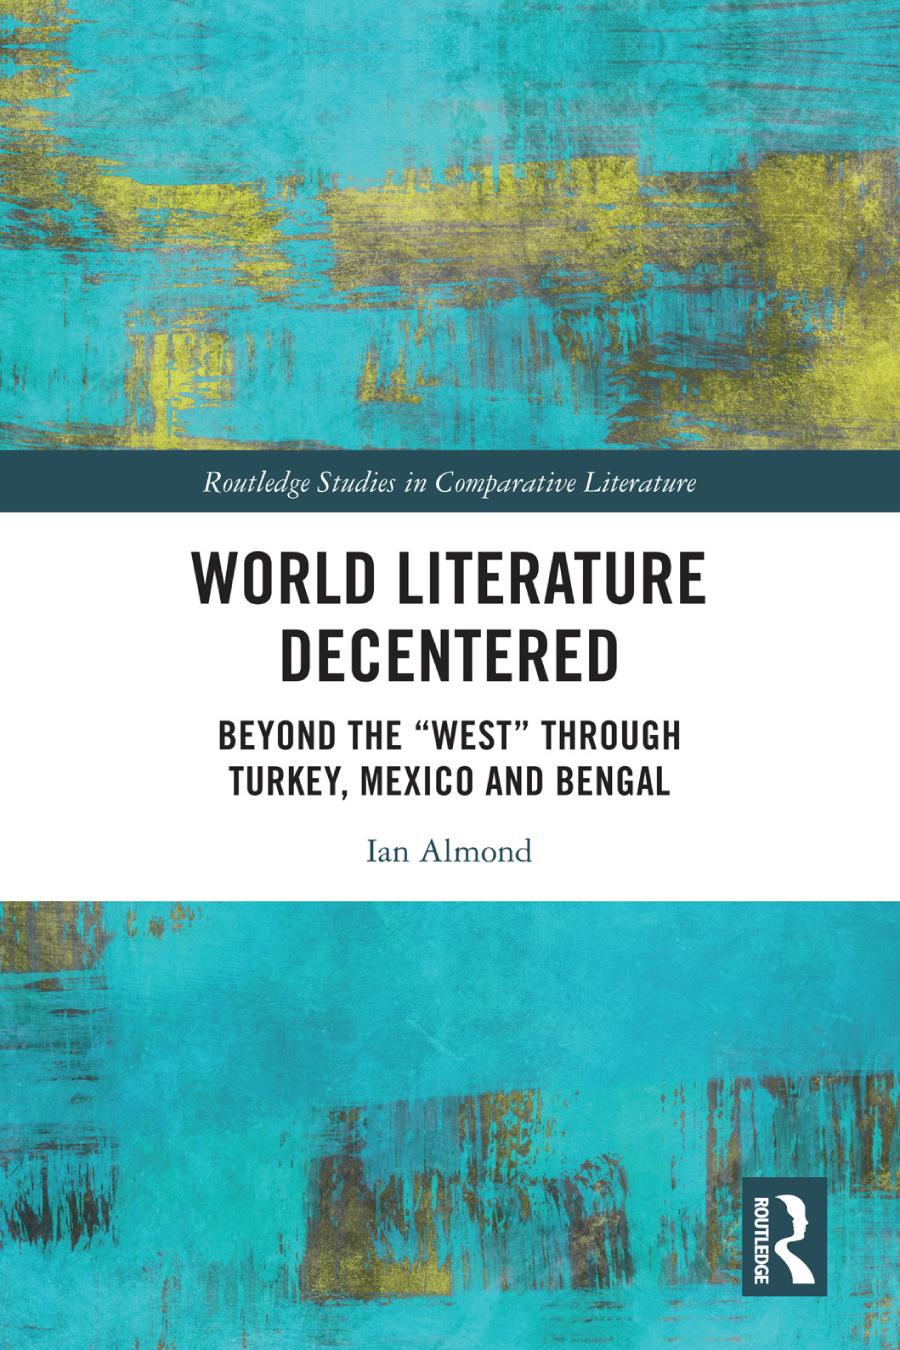 World literature decentered : beyond the "West" through Turkey, Mexico and Bengal